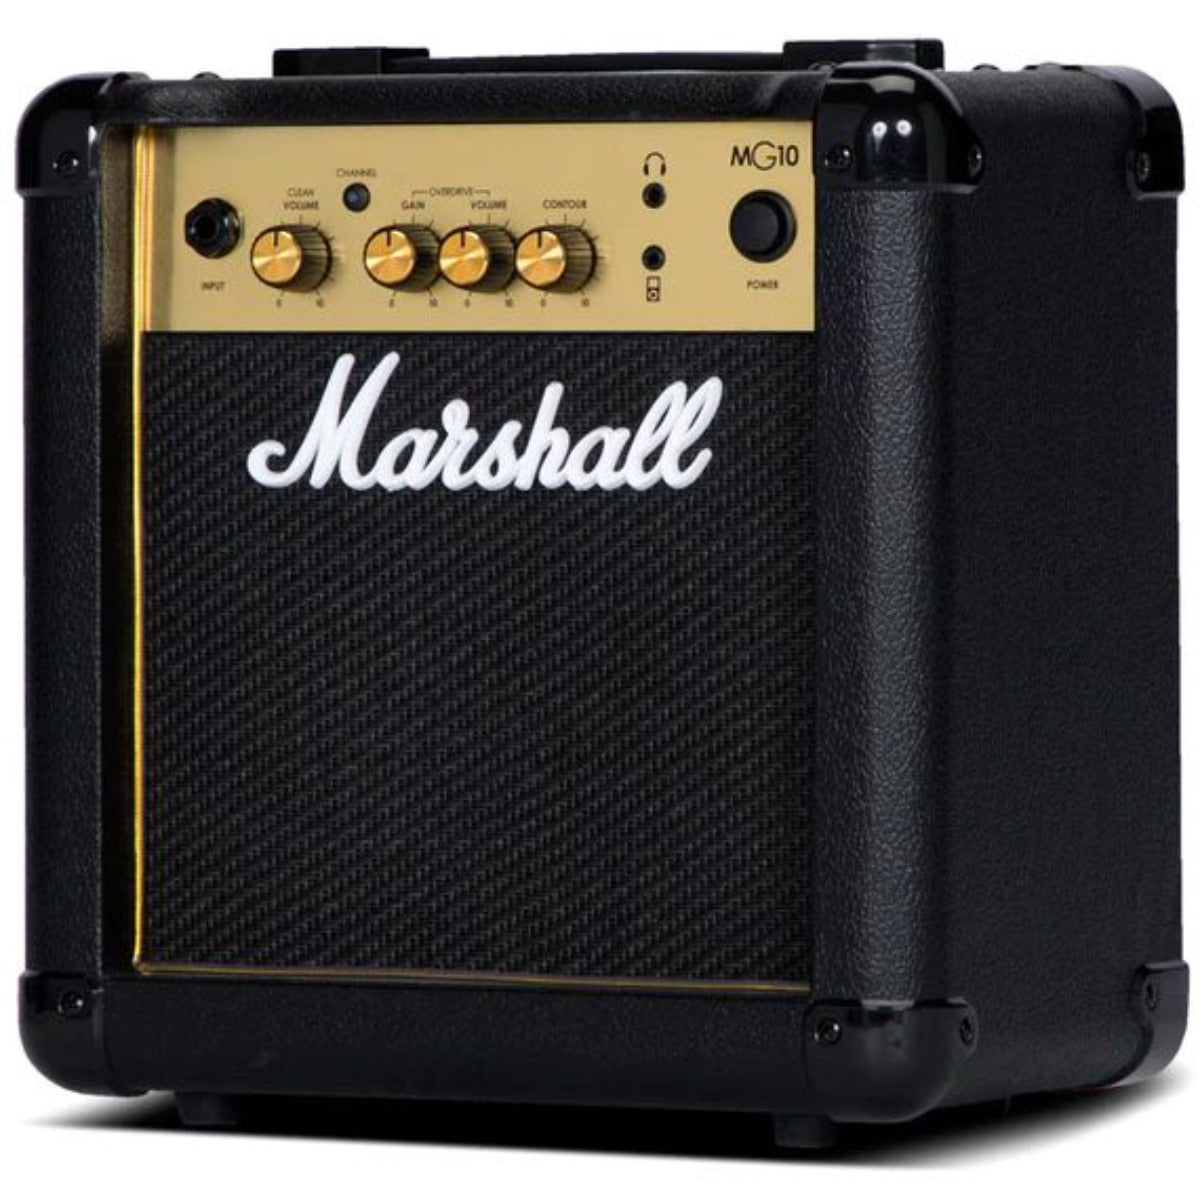 COMBO MARSHALL MG GOLD 10W 1X6.5 IN